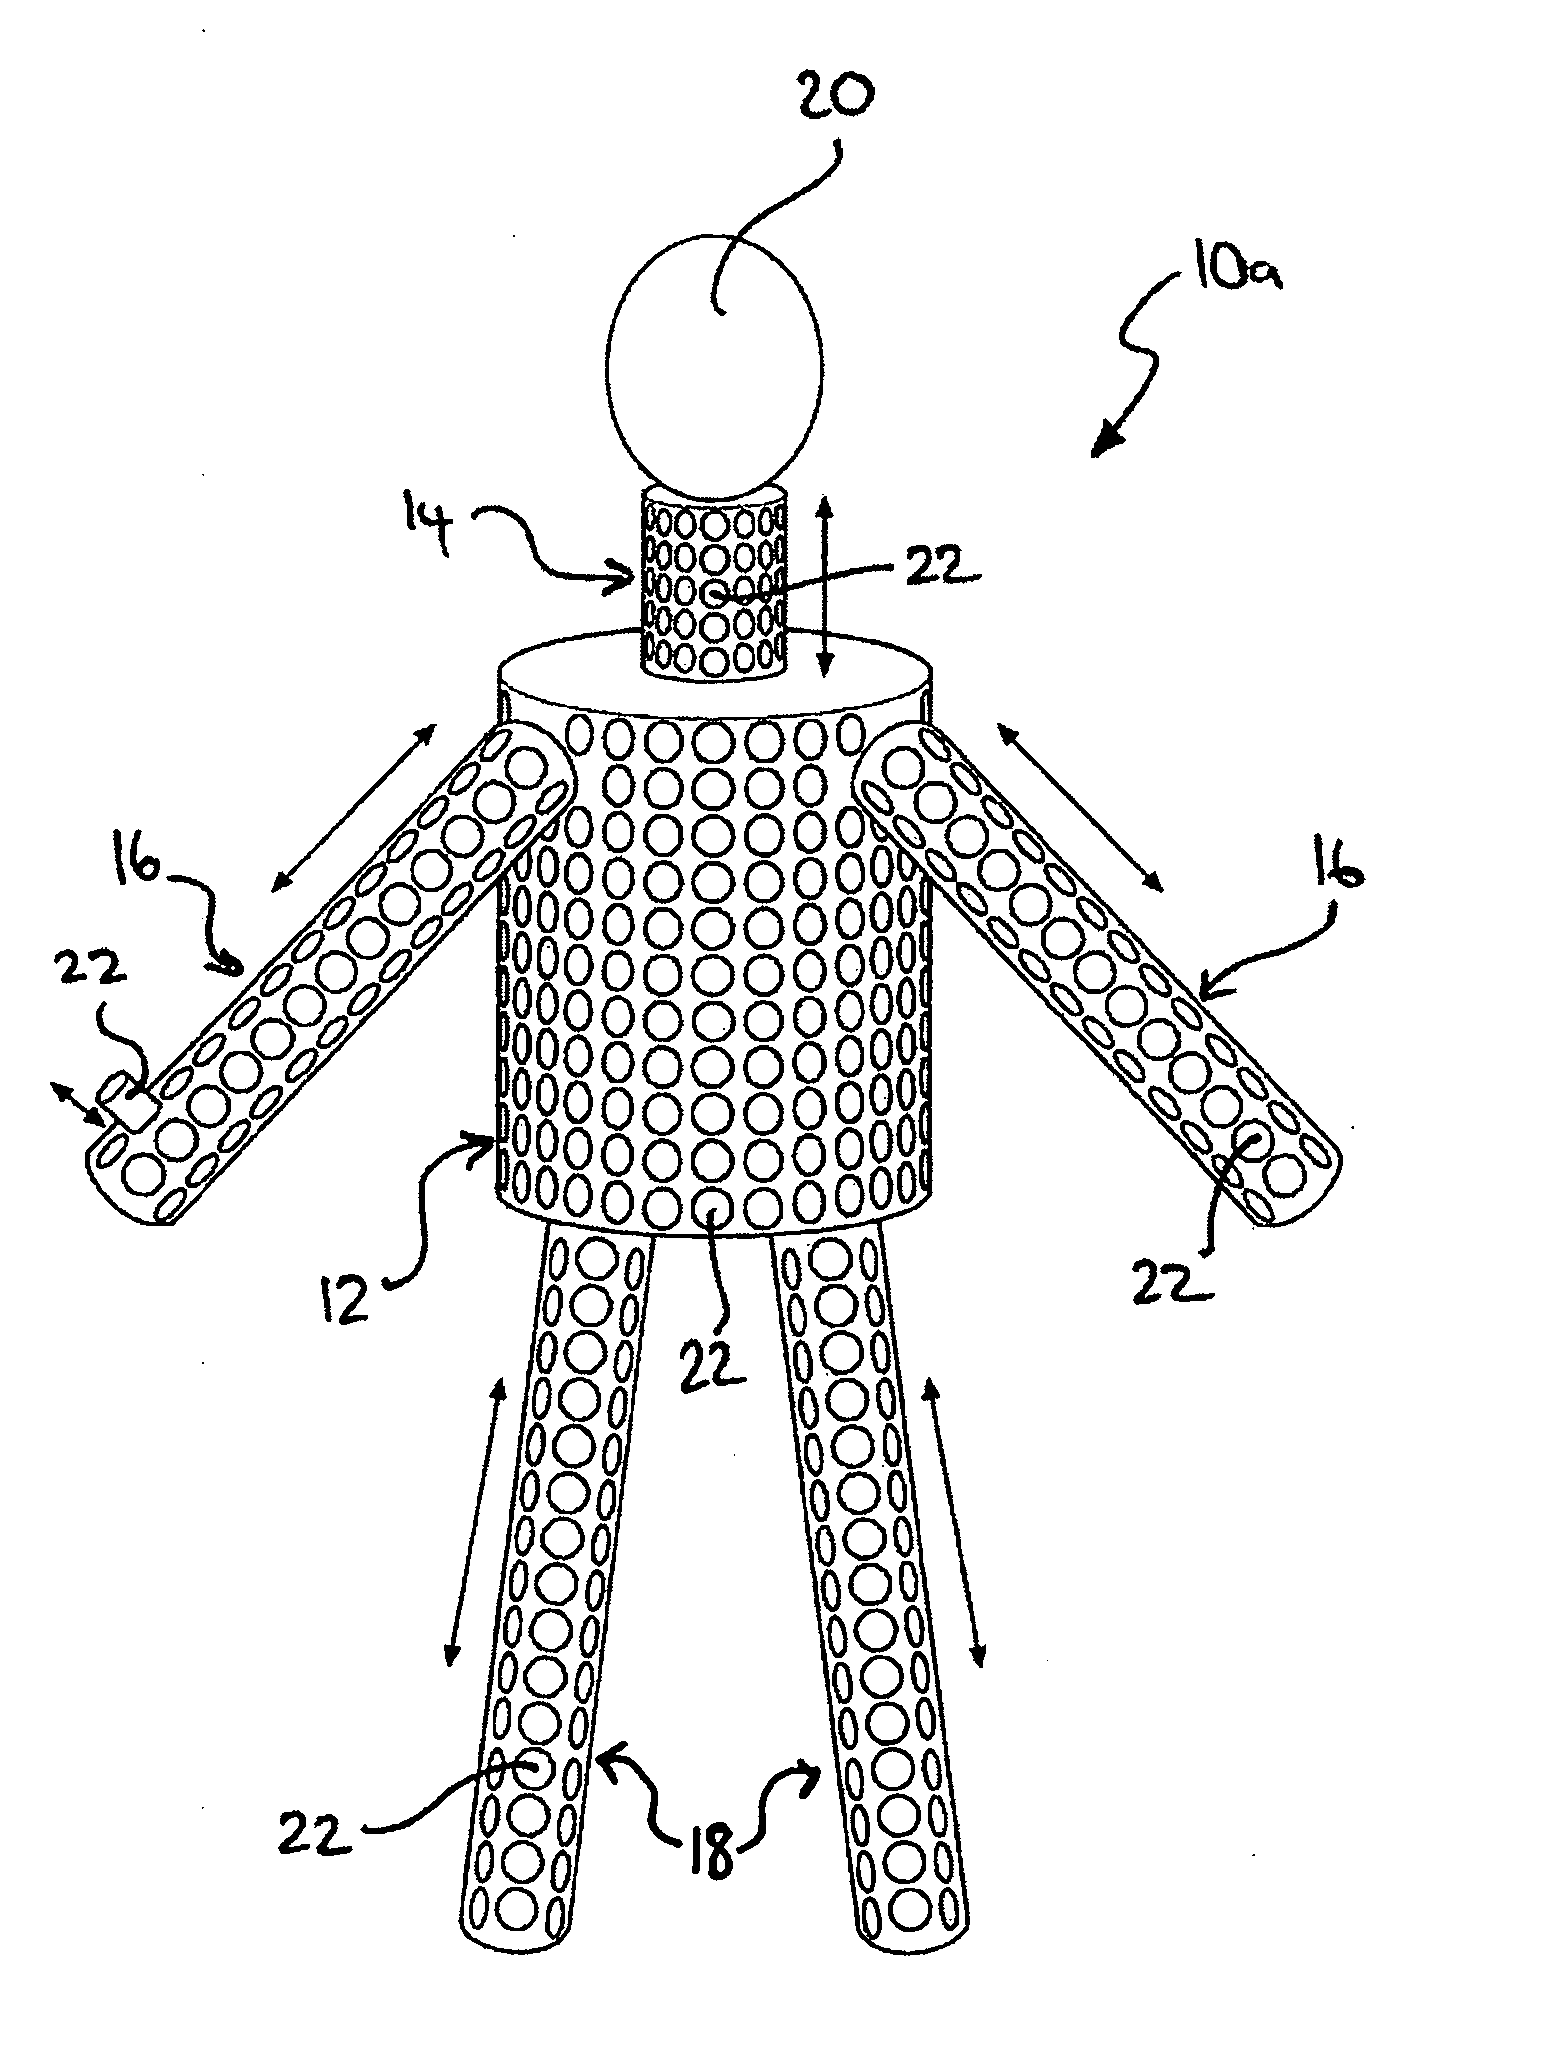 System and method of facilitating on line purchase of clothing